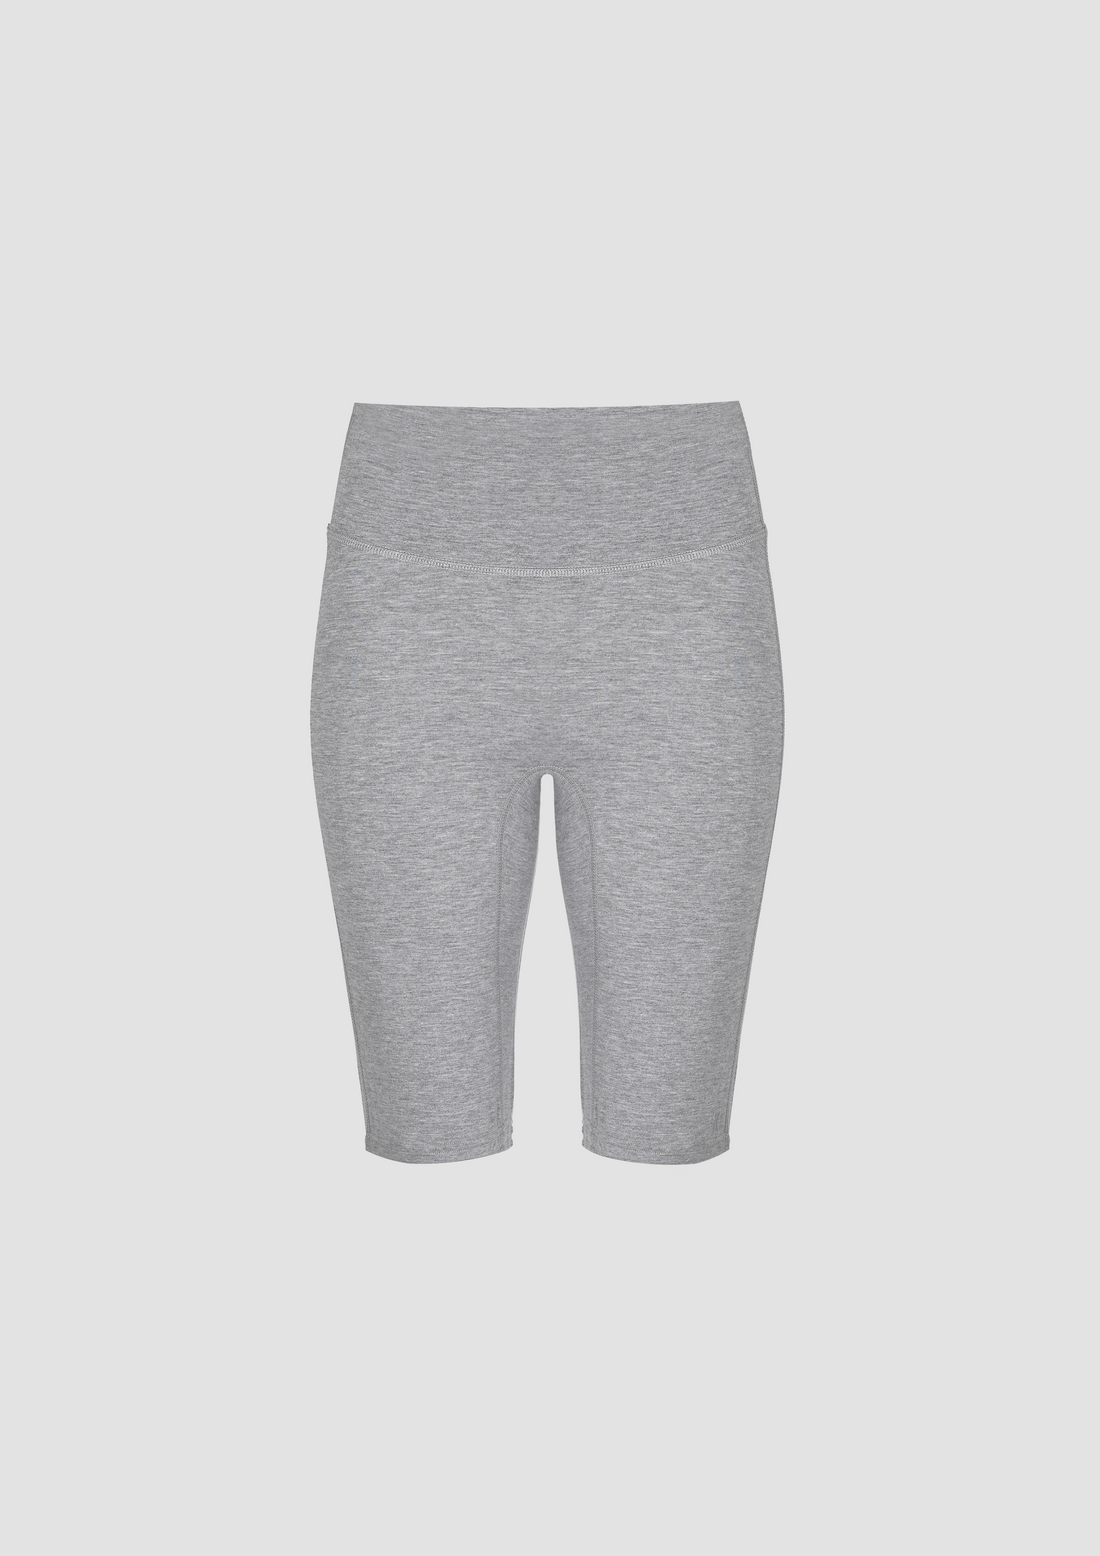 Skylar Cycling Shorts in TENCEL™ Lyocell and Organic Cotton in Melange